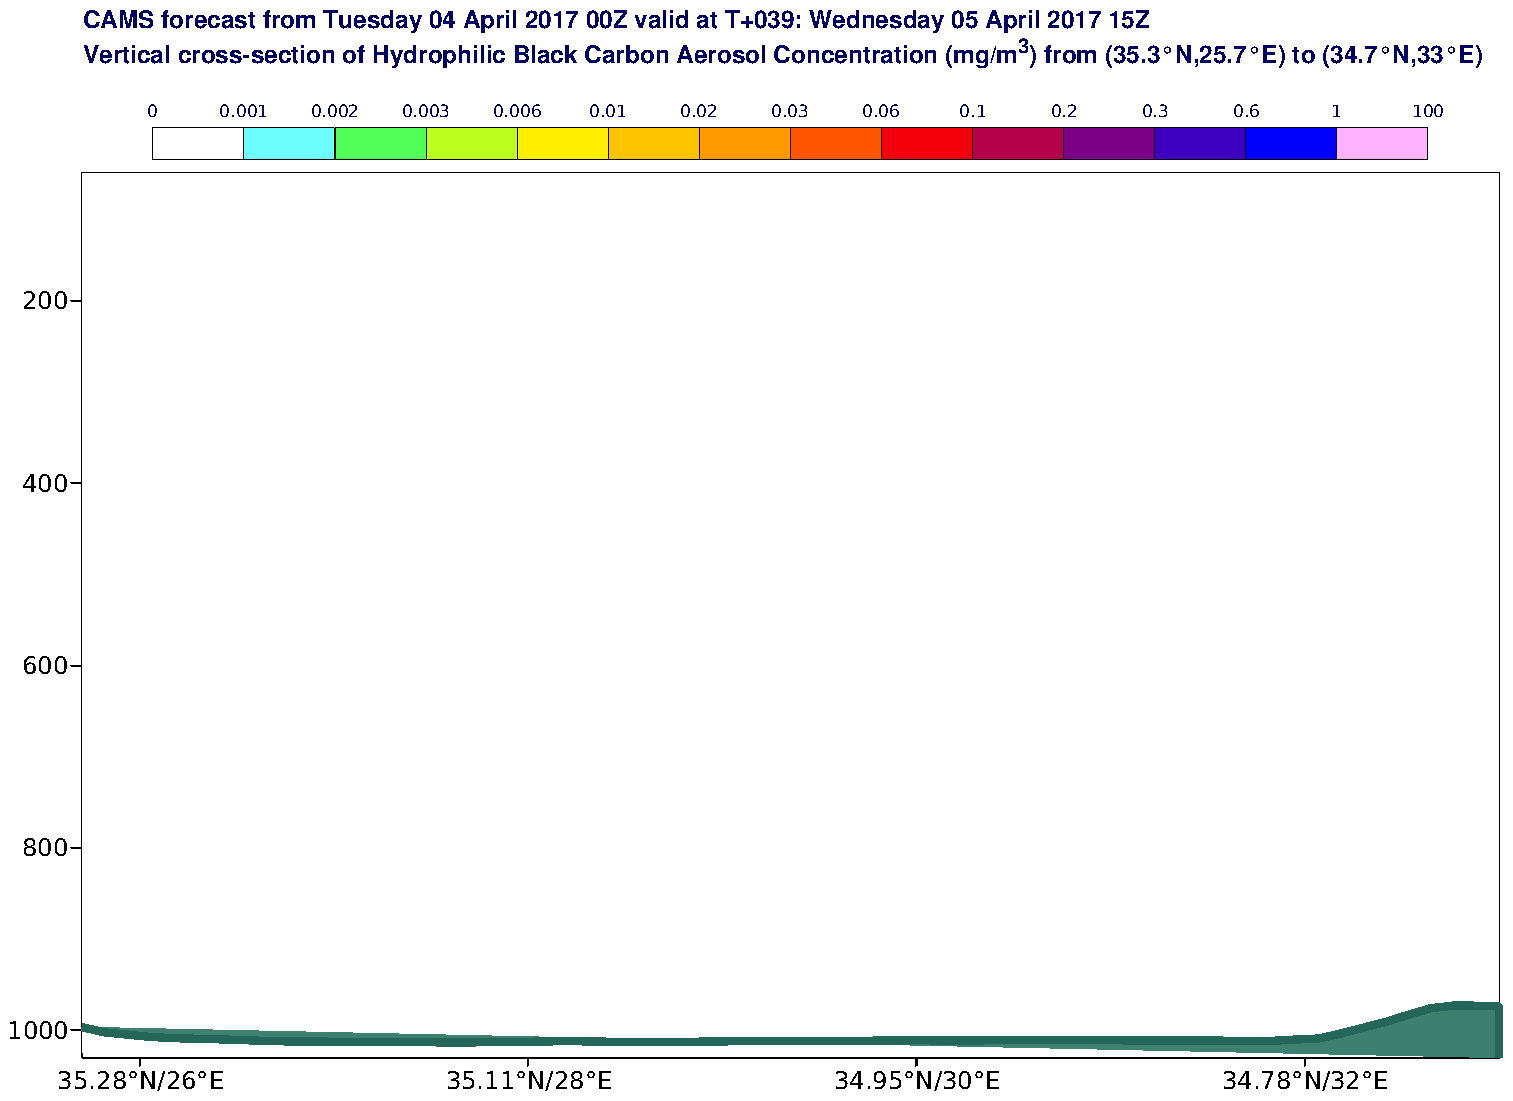 Vertical cross-section of Hydrophilic Black Carbon Aerosol Concentration (mg/m3) valid at T39 - 2017-04-05 15:00